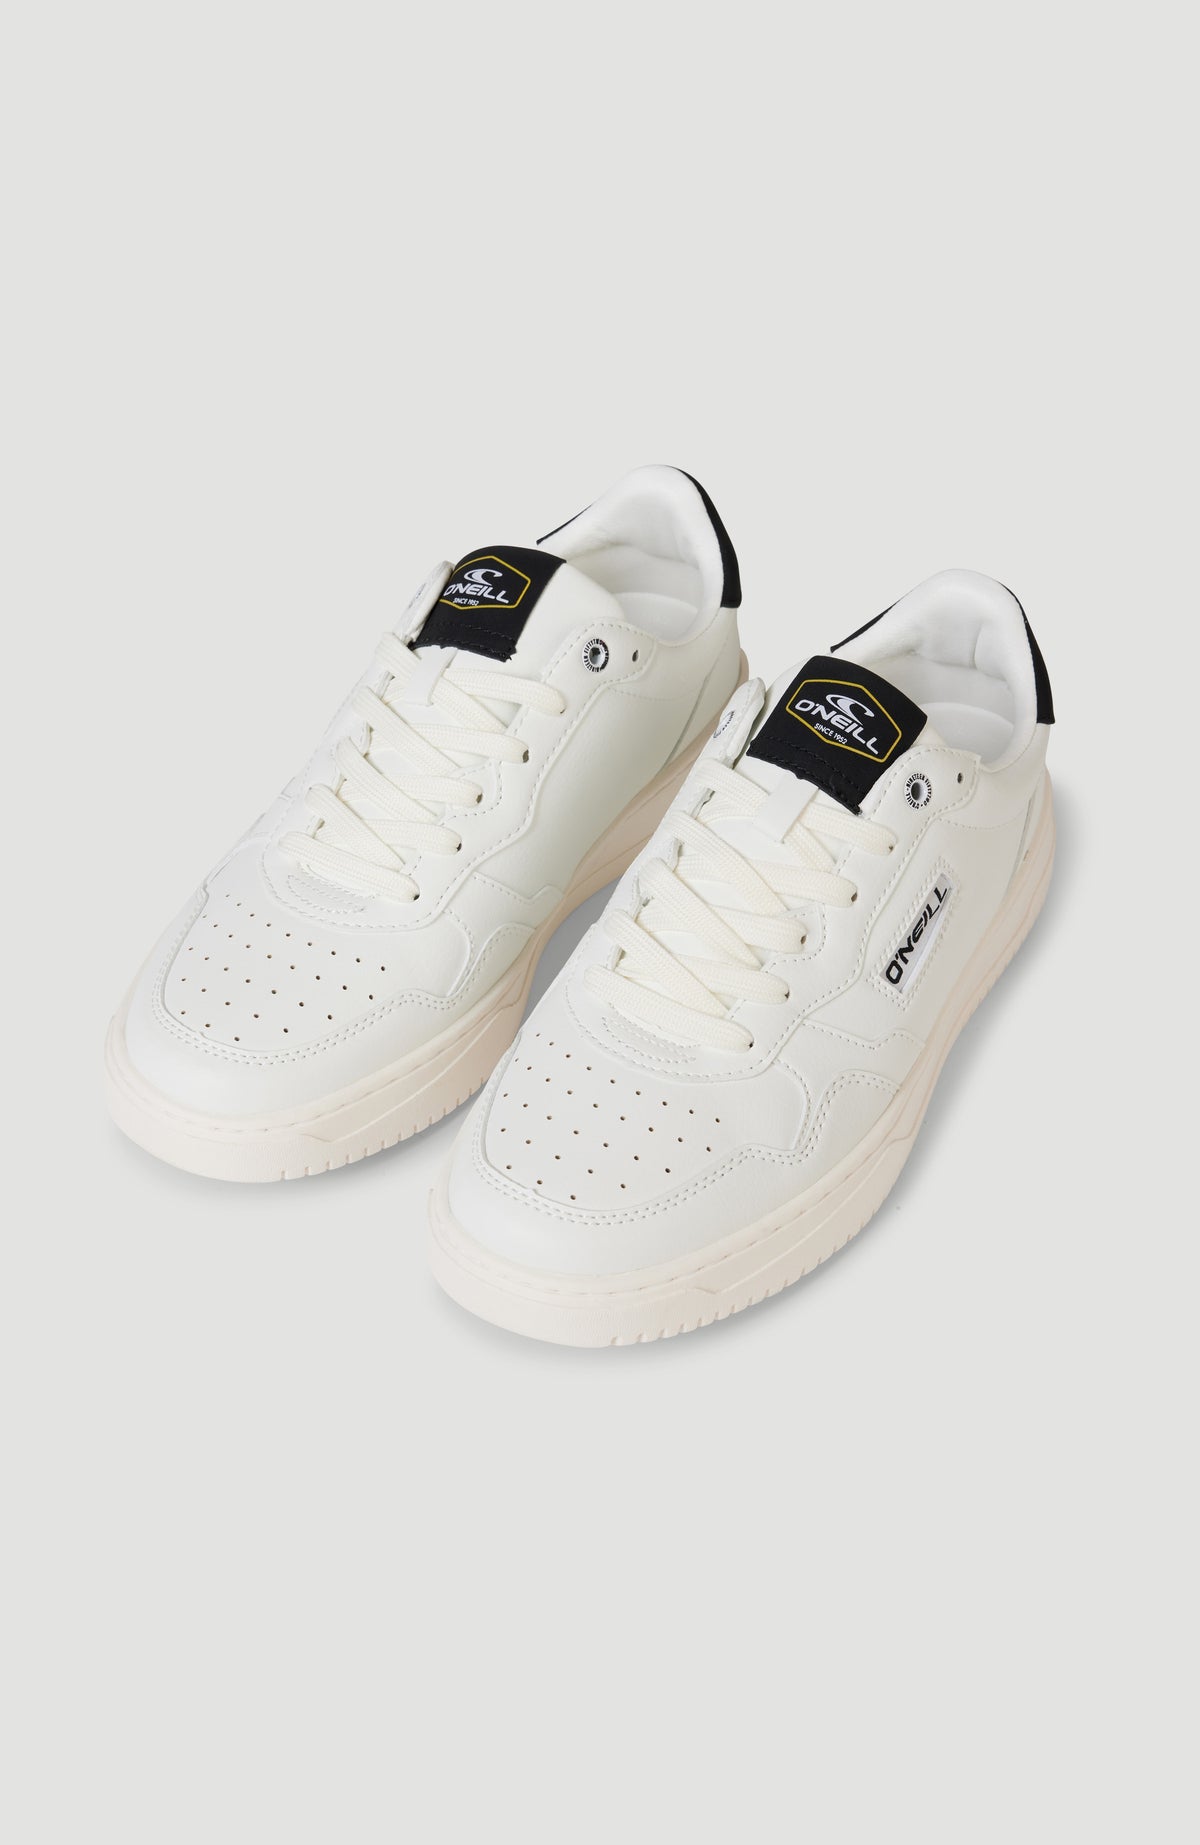 HOMYPED WOMENS AIRSTEP LACE WHITE Online by HOMYPED | Just Walking